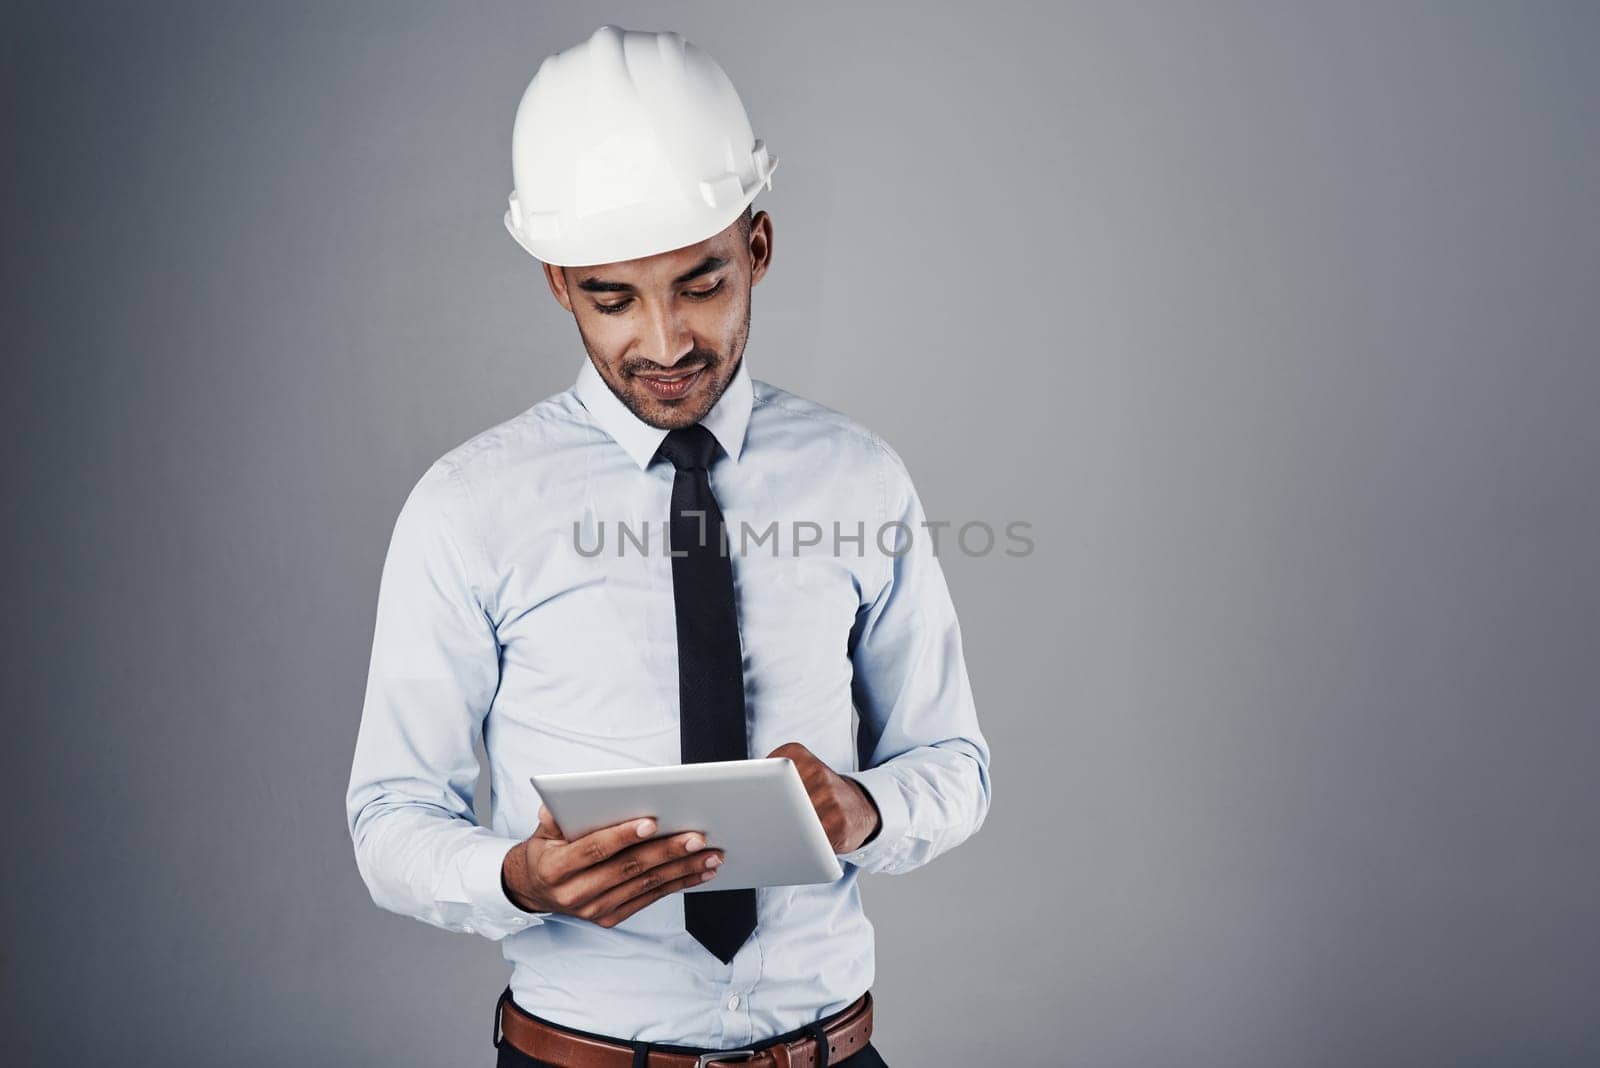 Designing made easy. a well-dressed civil engineer using his tablet while standing in the studio